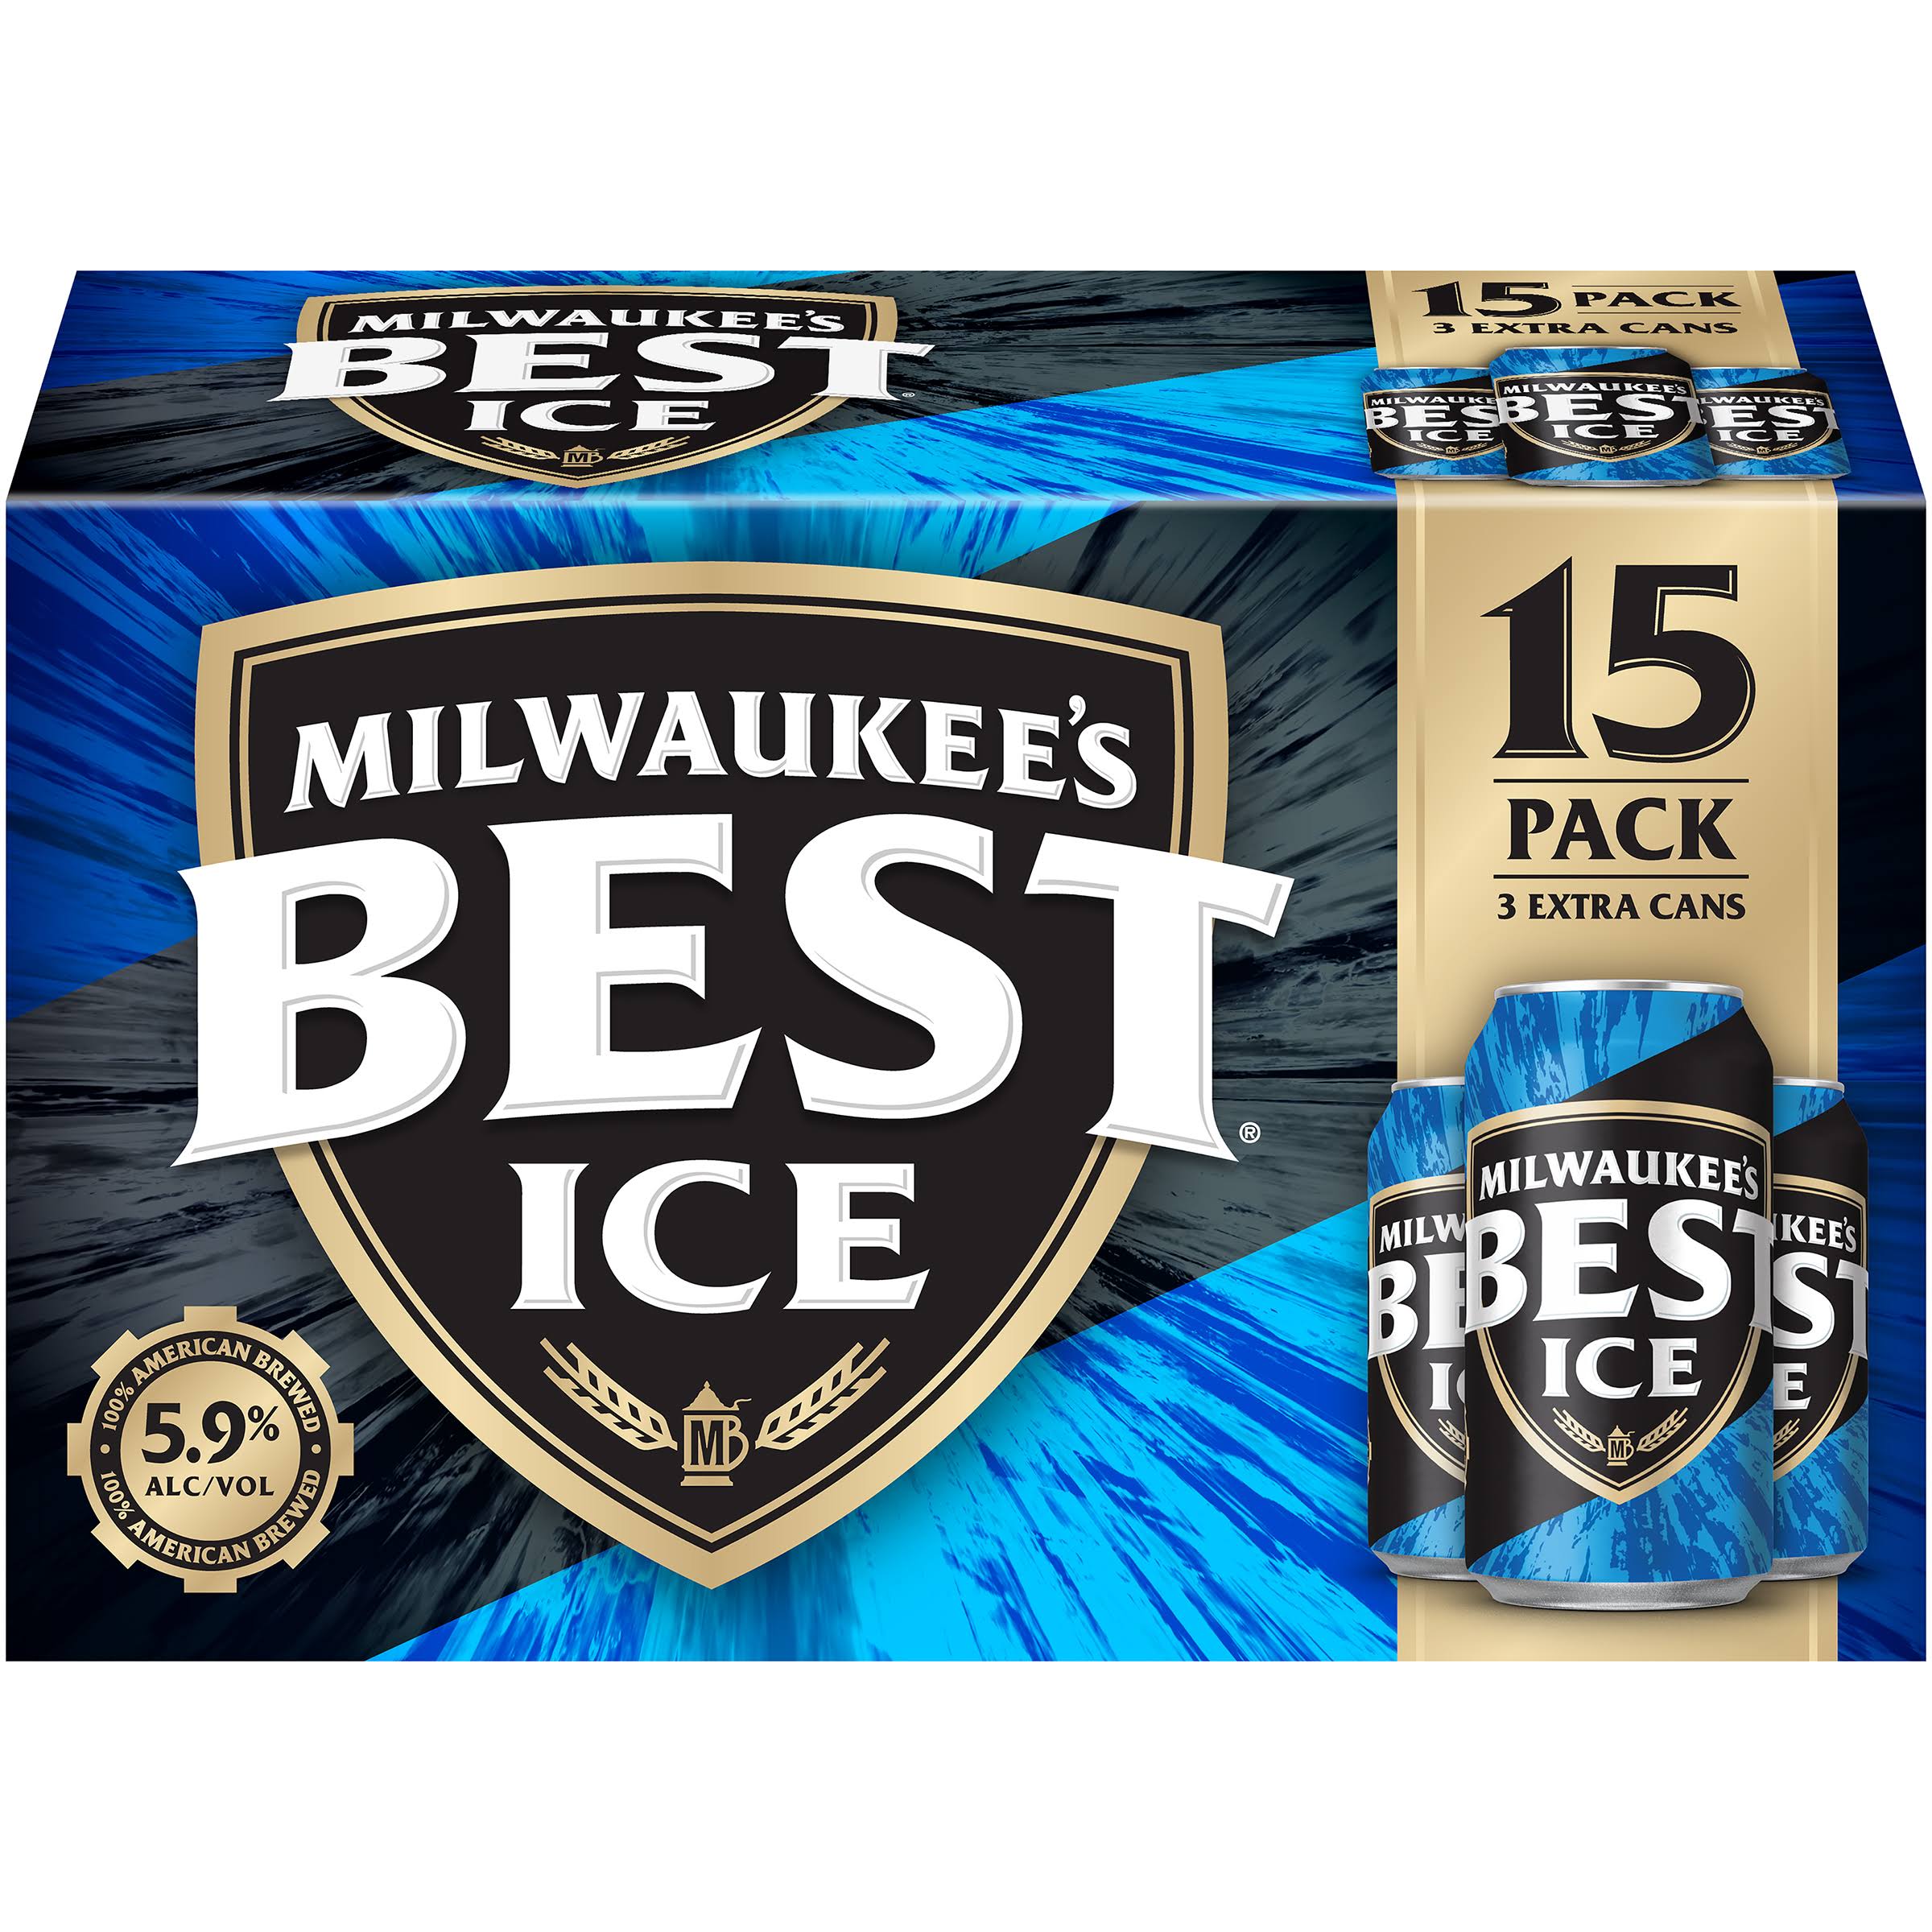 Milwaukees Best Ice Beer, 15 Pack - 15 cans